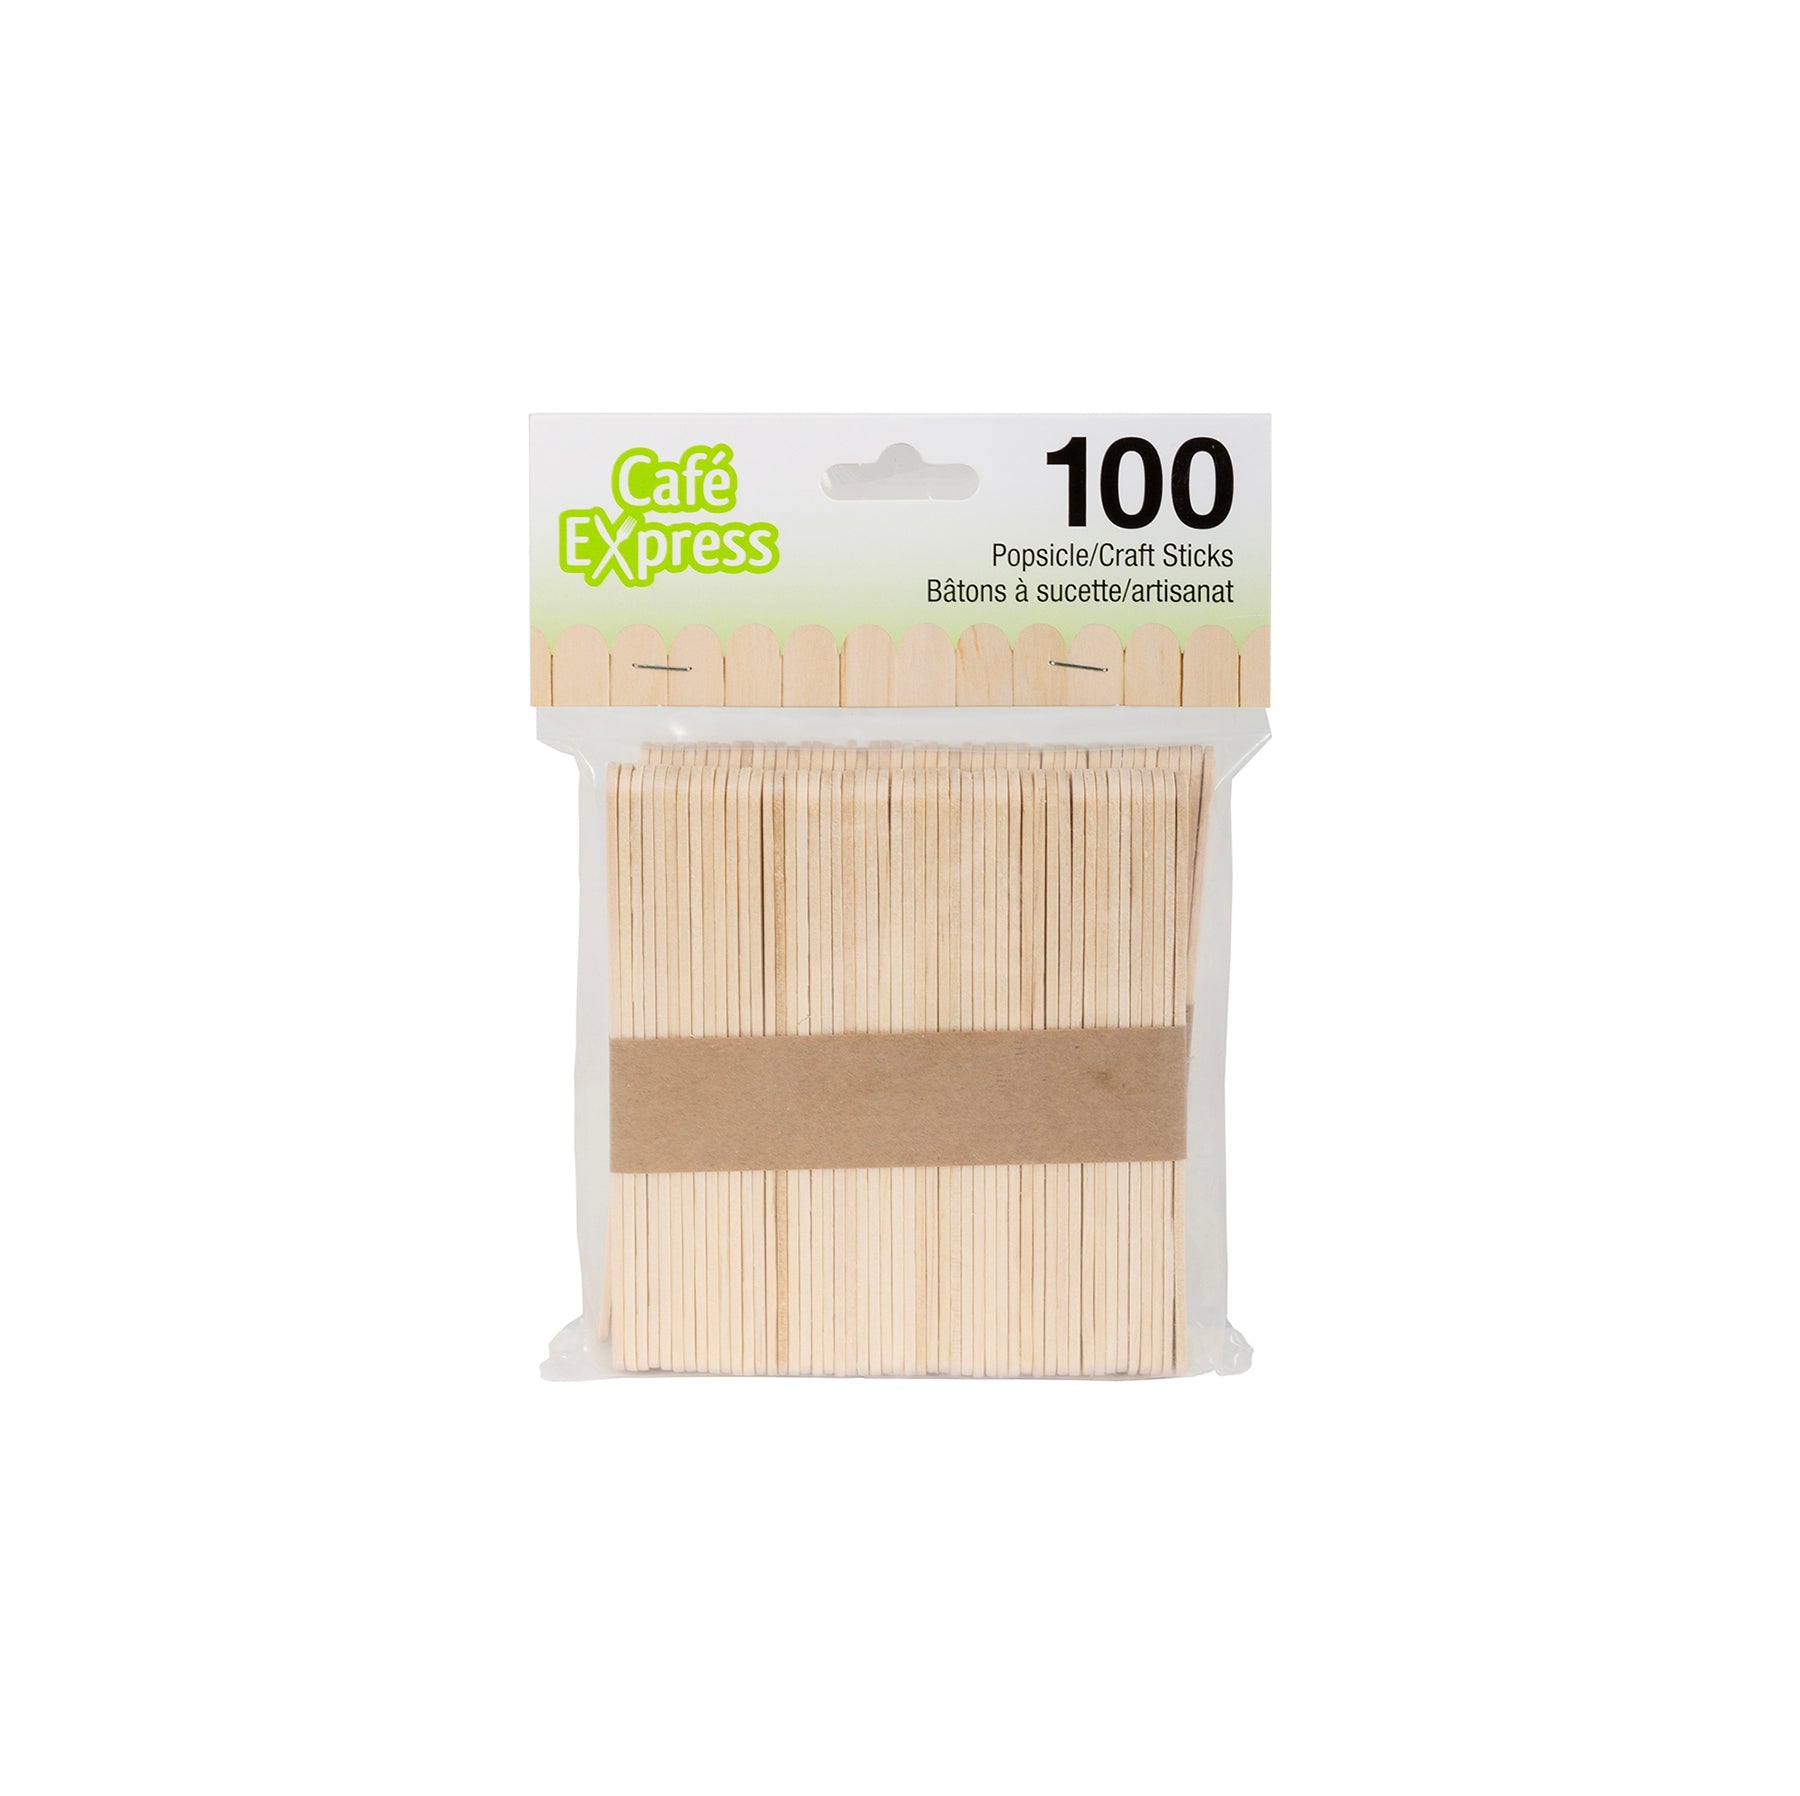 Cafe Express 100 Wooden Popsicle / Craft Sticks 4.5in